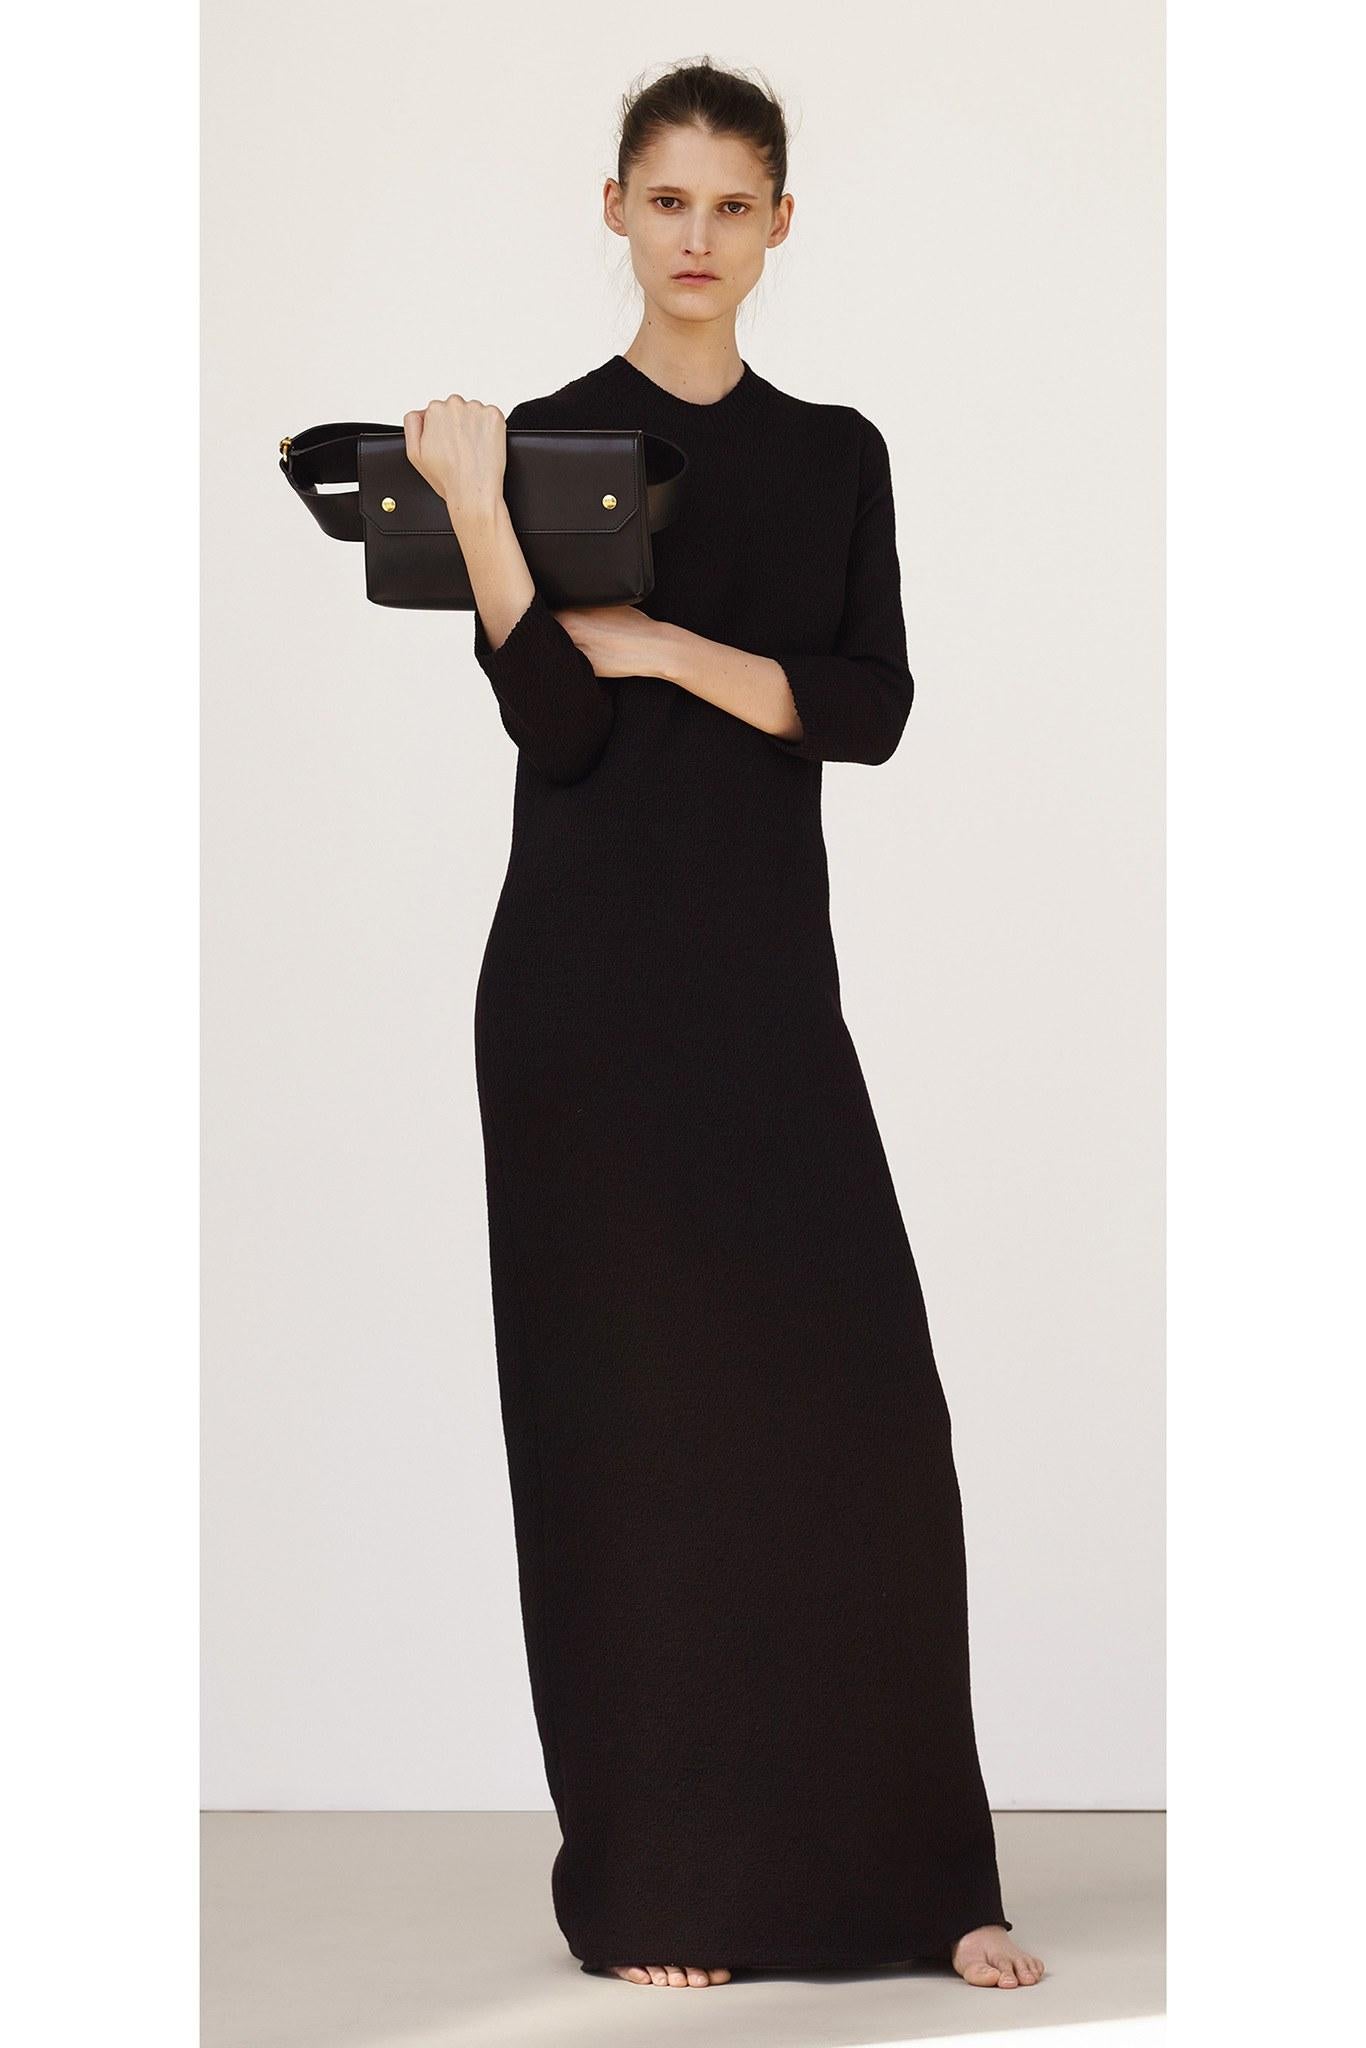 CELINE by PHOEBE PHILO 'Joan Didion' long black ad campaign dress In Good Condition In San Fransisco, CA